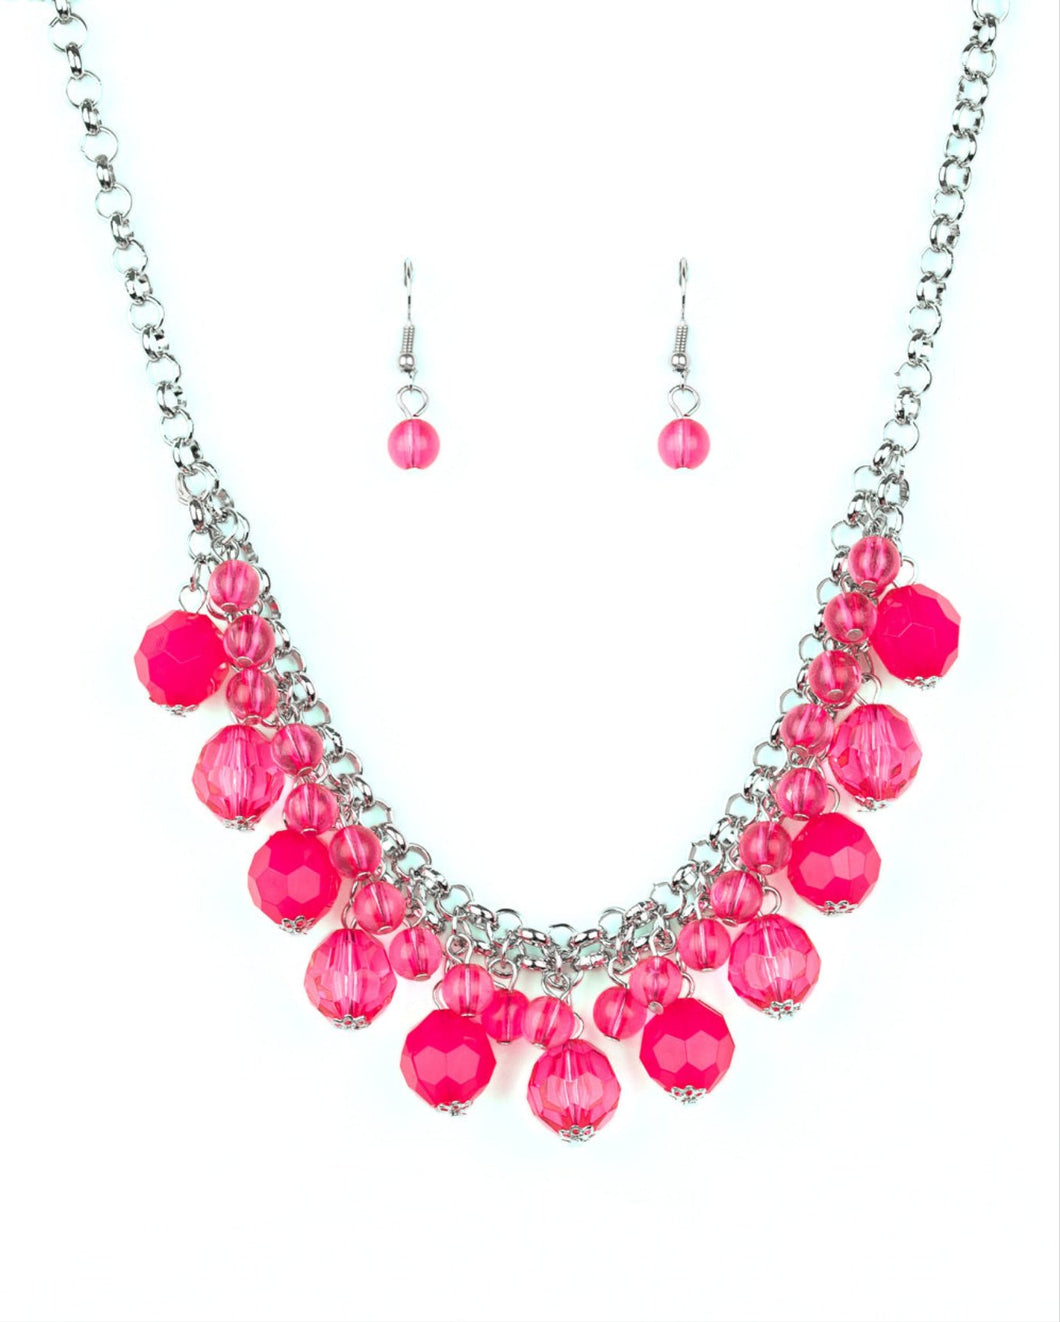 Fiesta Fabulous Pink Necklace and Earrings